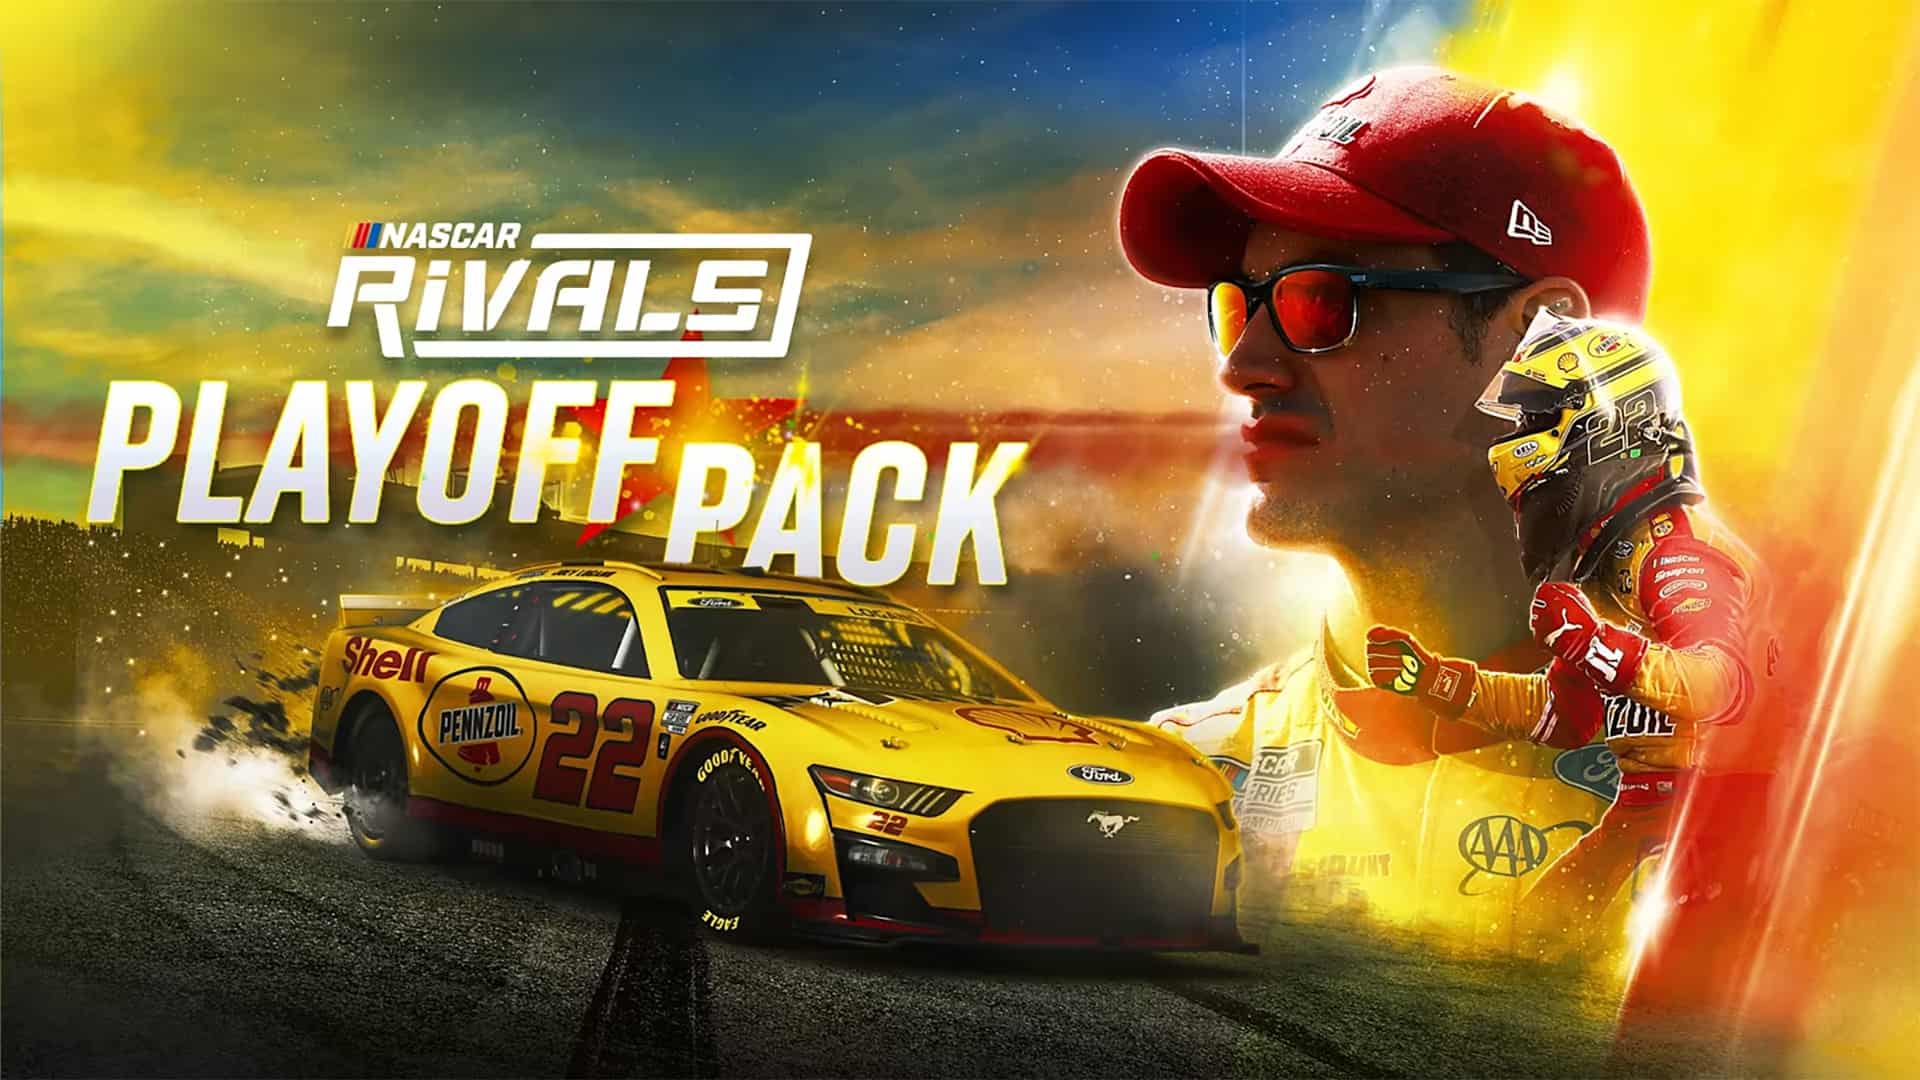 NASCAR Rivals unveils Playoff Pack DLC, now available